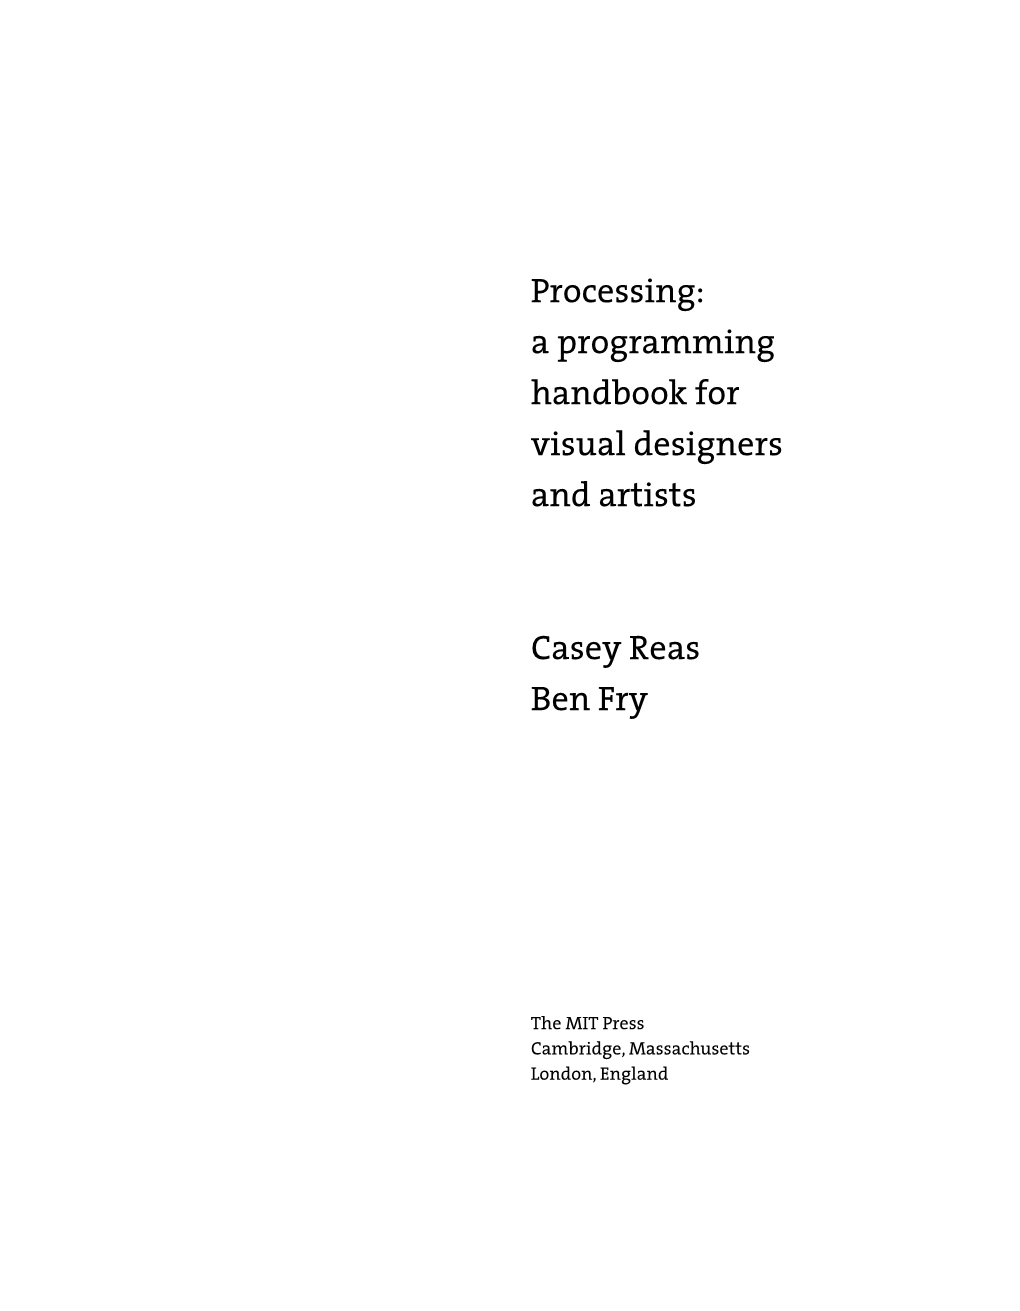 Processing: a Programming Handbook for Visual Designers and Artists